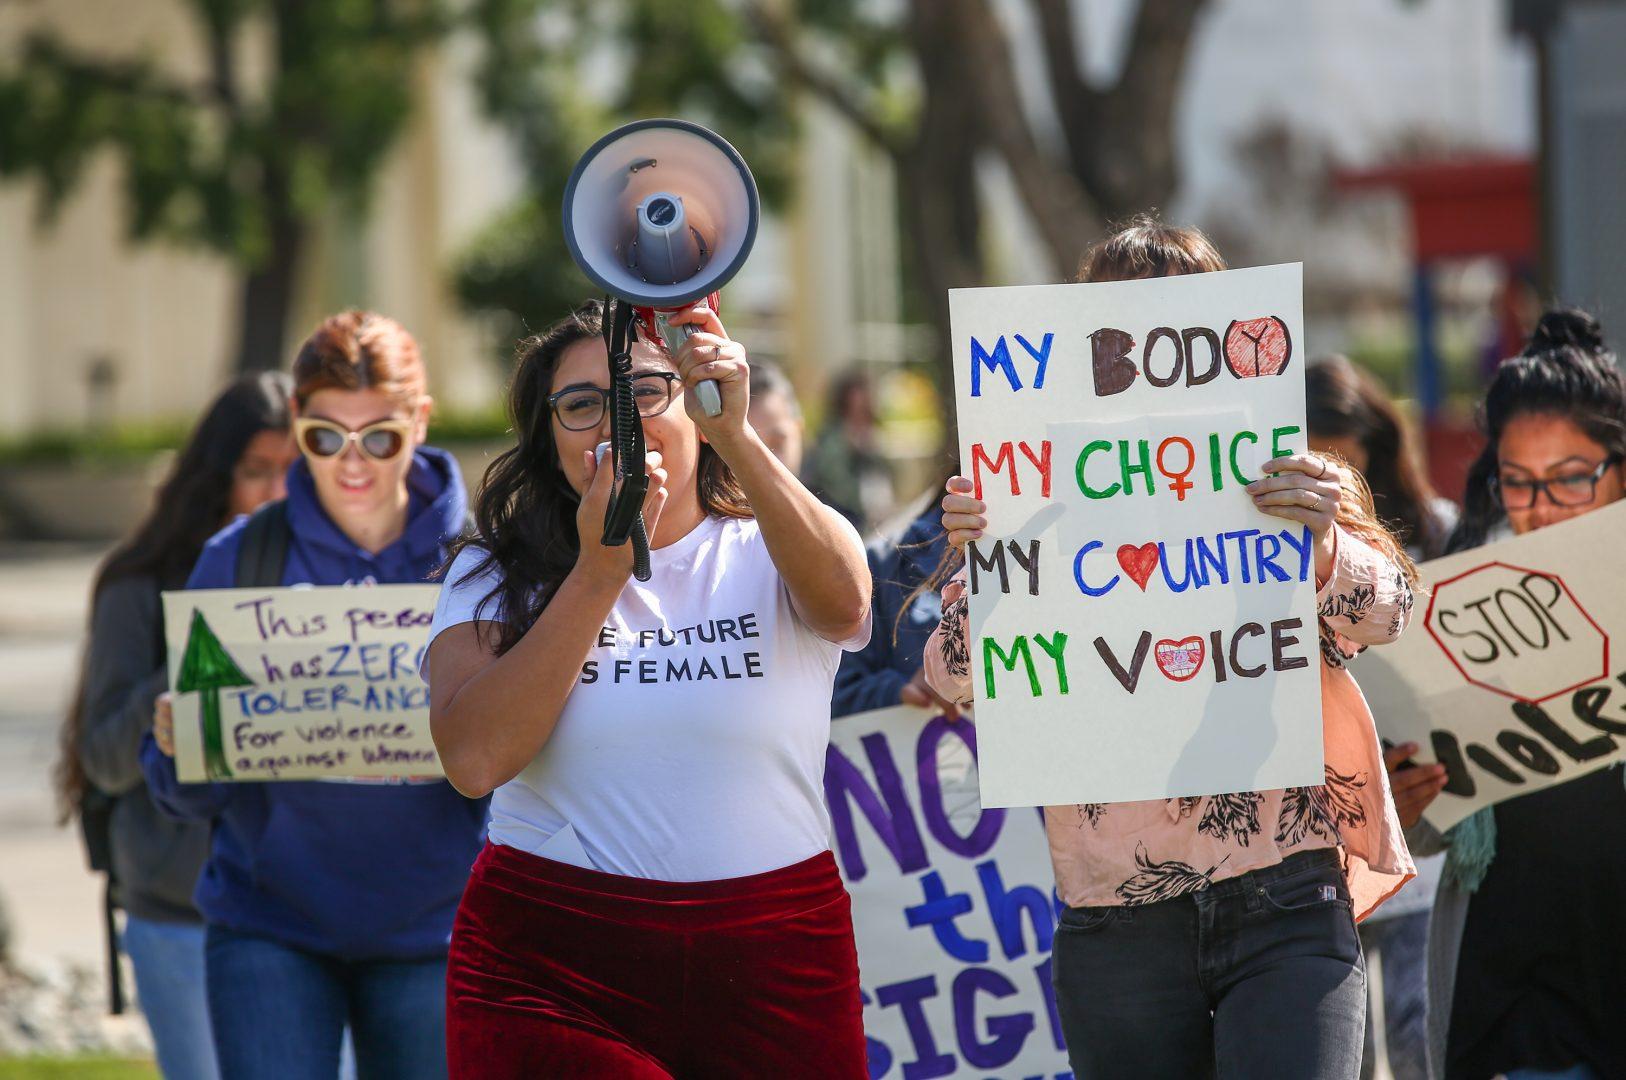 Fresno State students march through campus as part of the global One Billion Rising movement that advocates for ending violence against women.